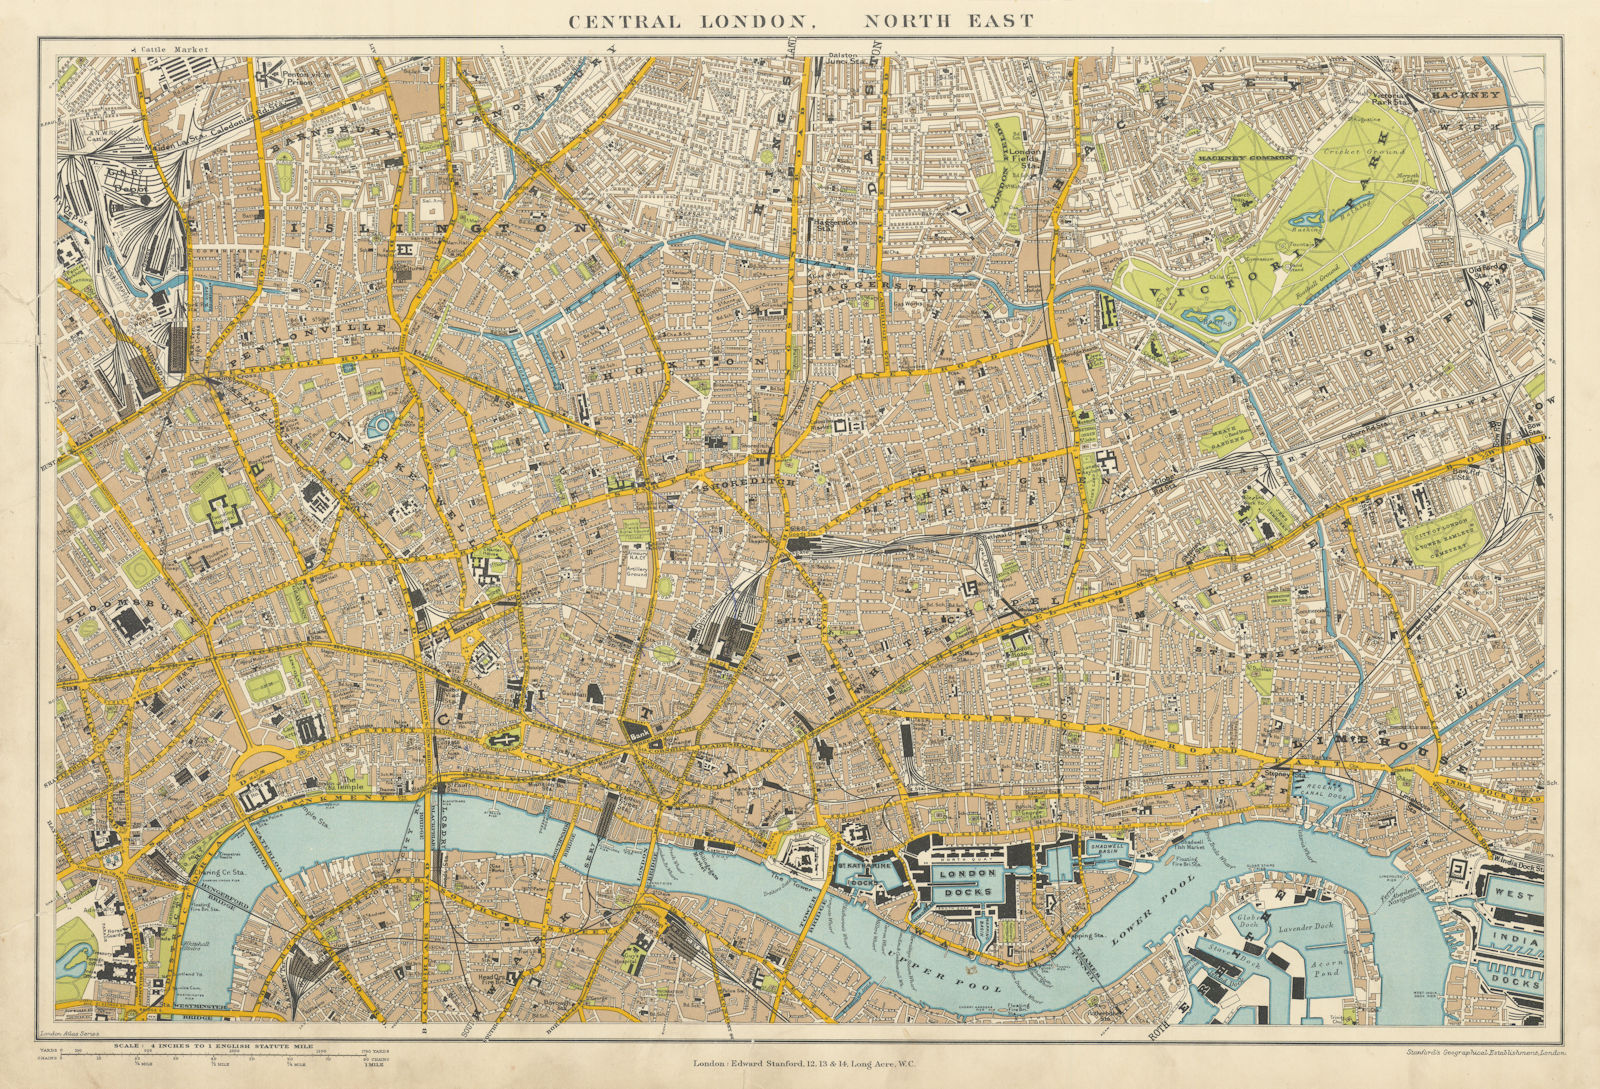 Associate Product Central London N.E. City Clerkenwell Islington Hackney. STANFORD 1904 old map